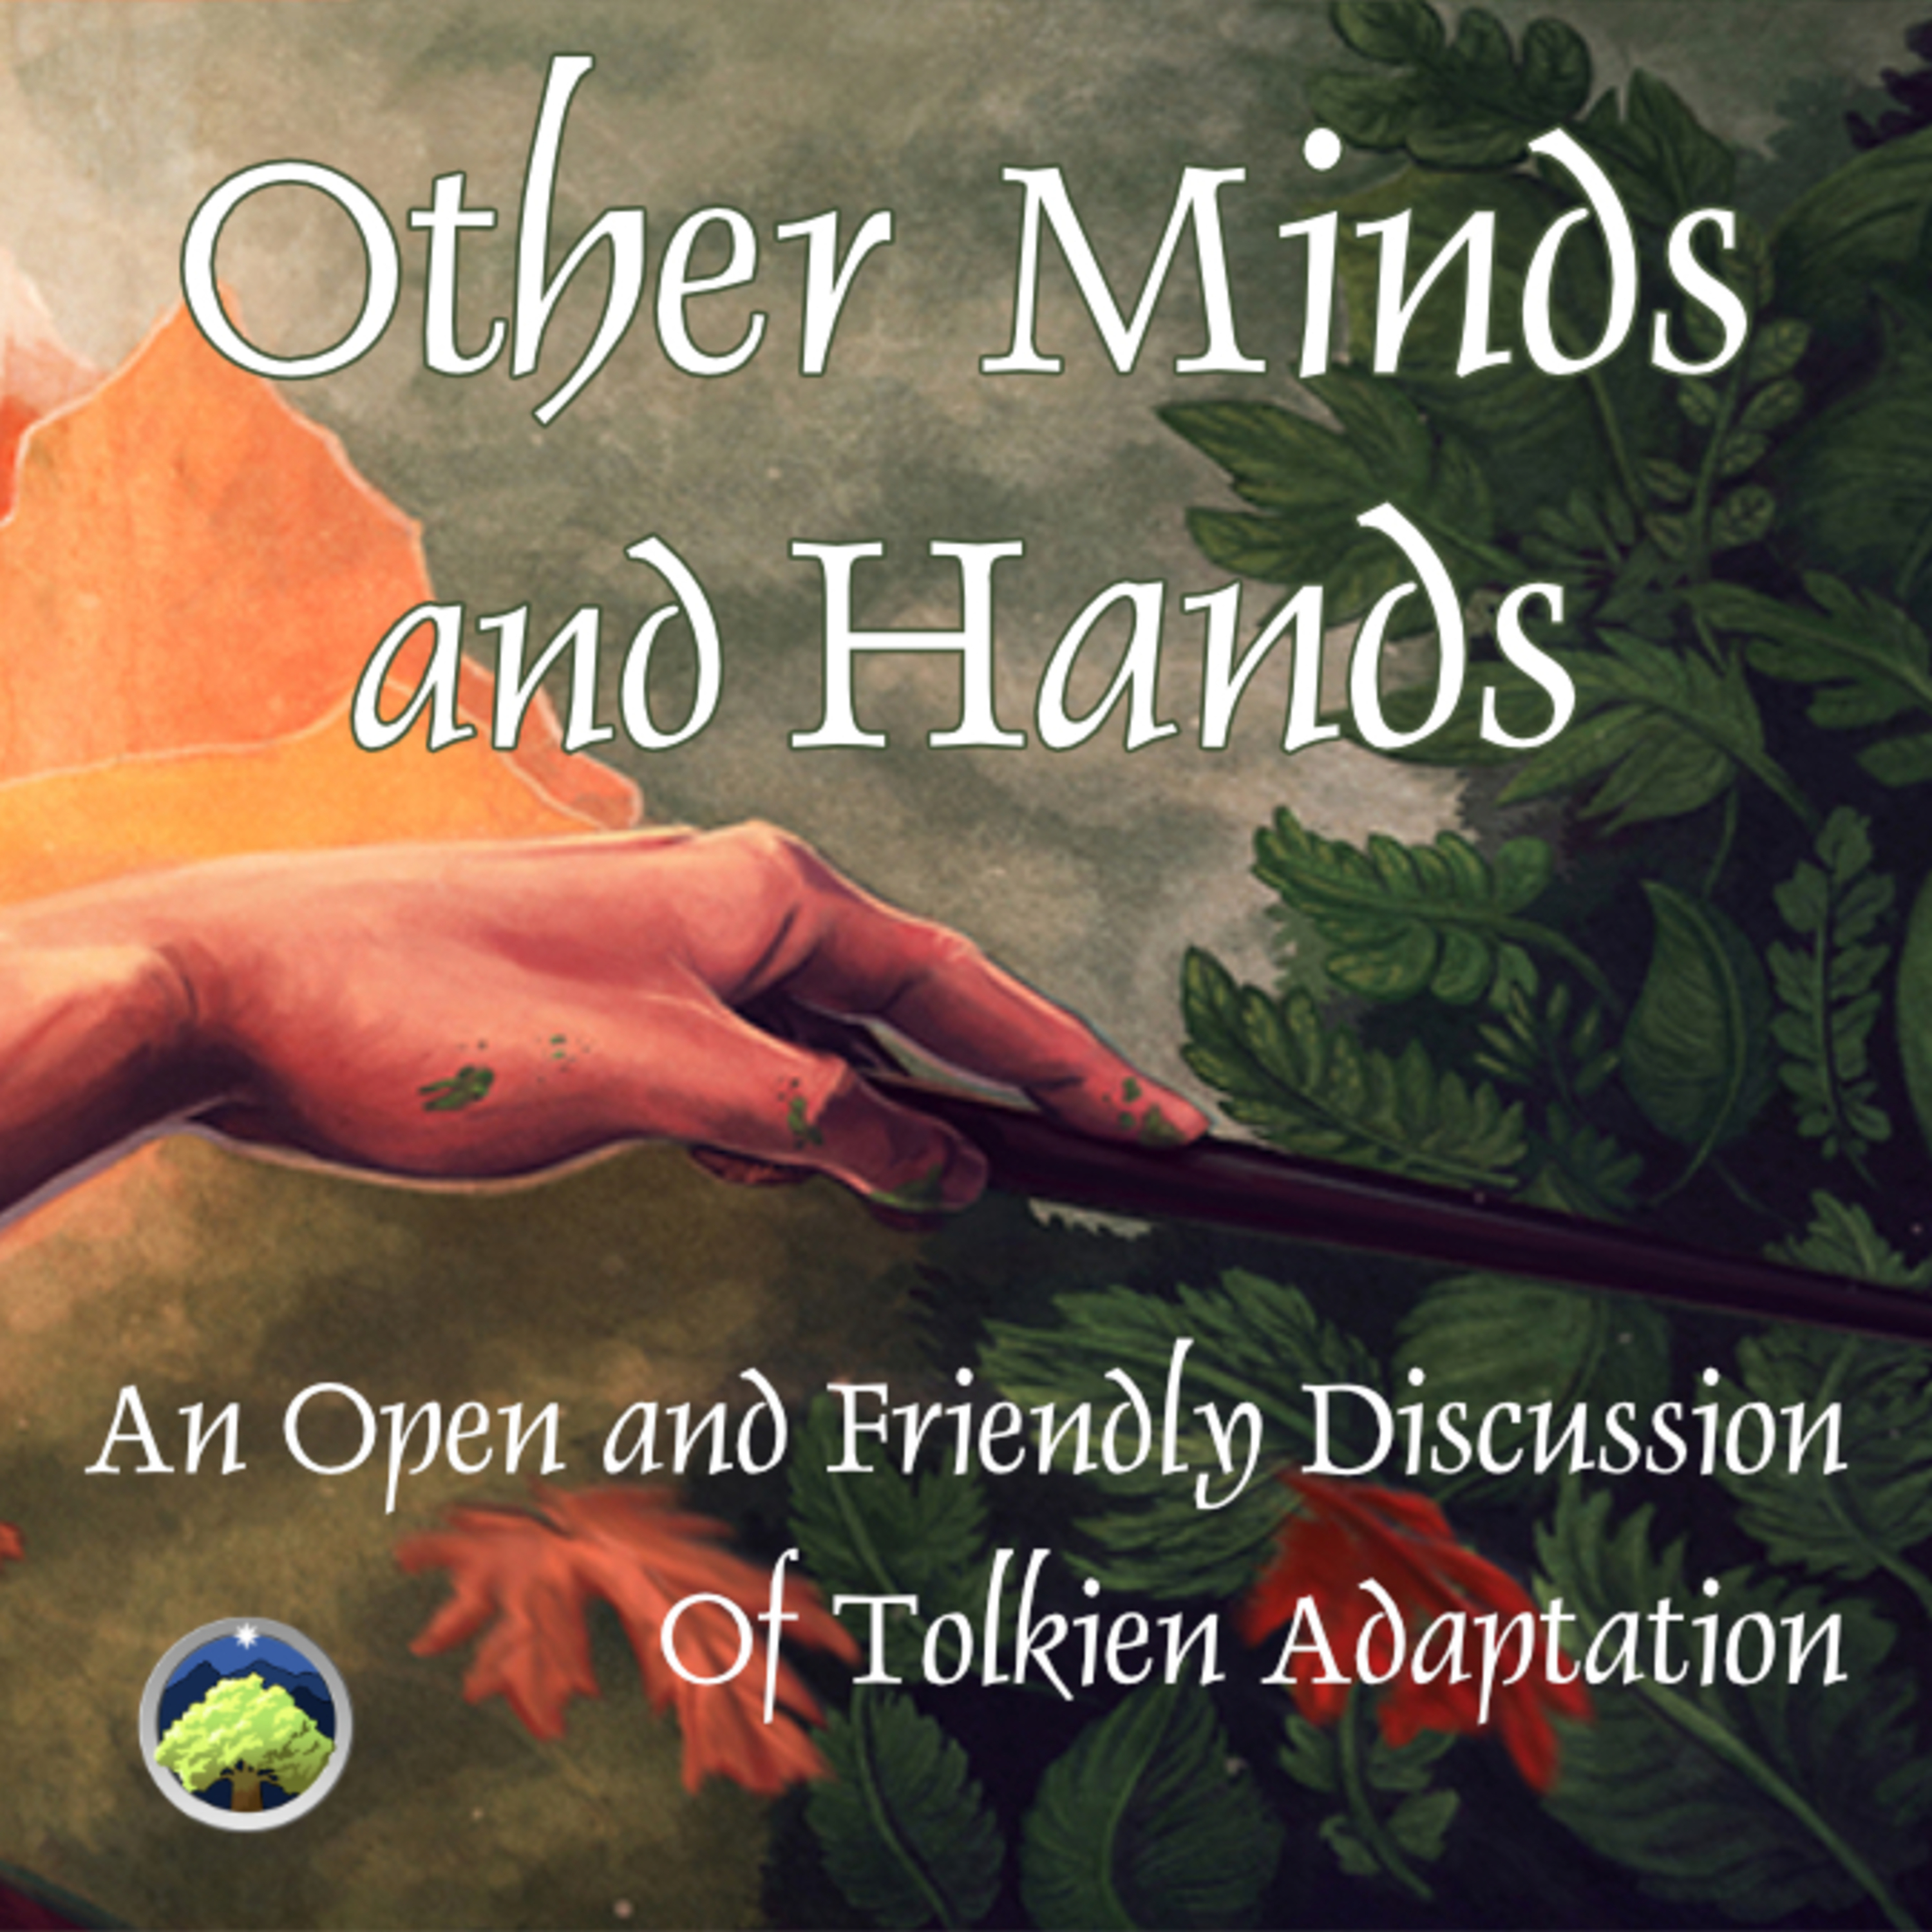 464: Other Minds and Hands, Episode 3